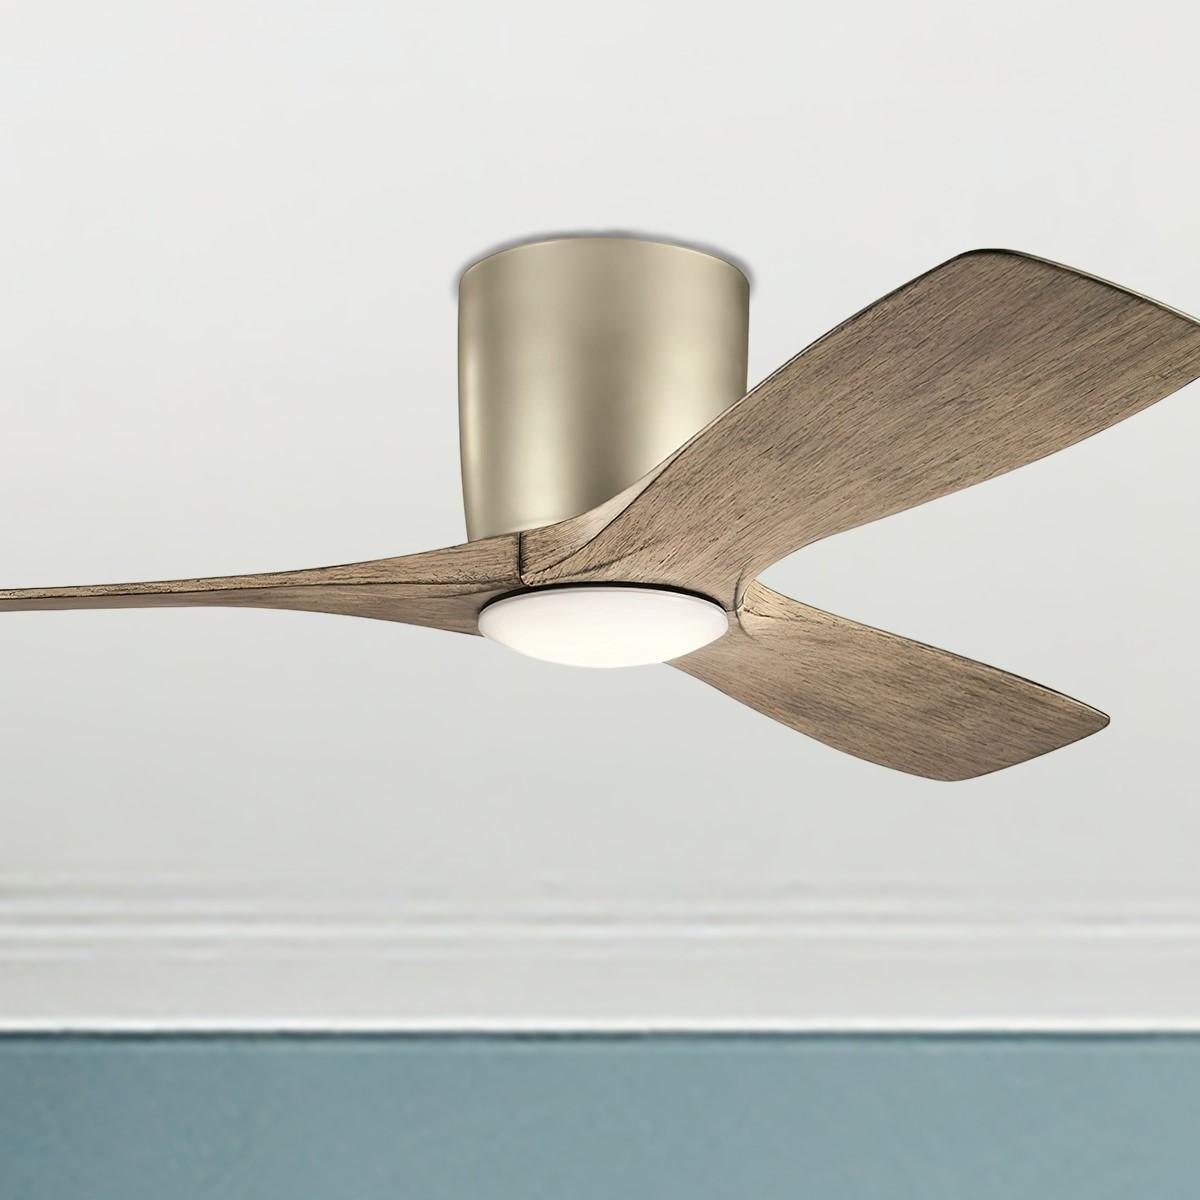 Volos 48 Inch Contemporary Ceiling Fan With Light, Wall Control Included - Bees Lighting